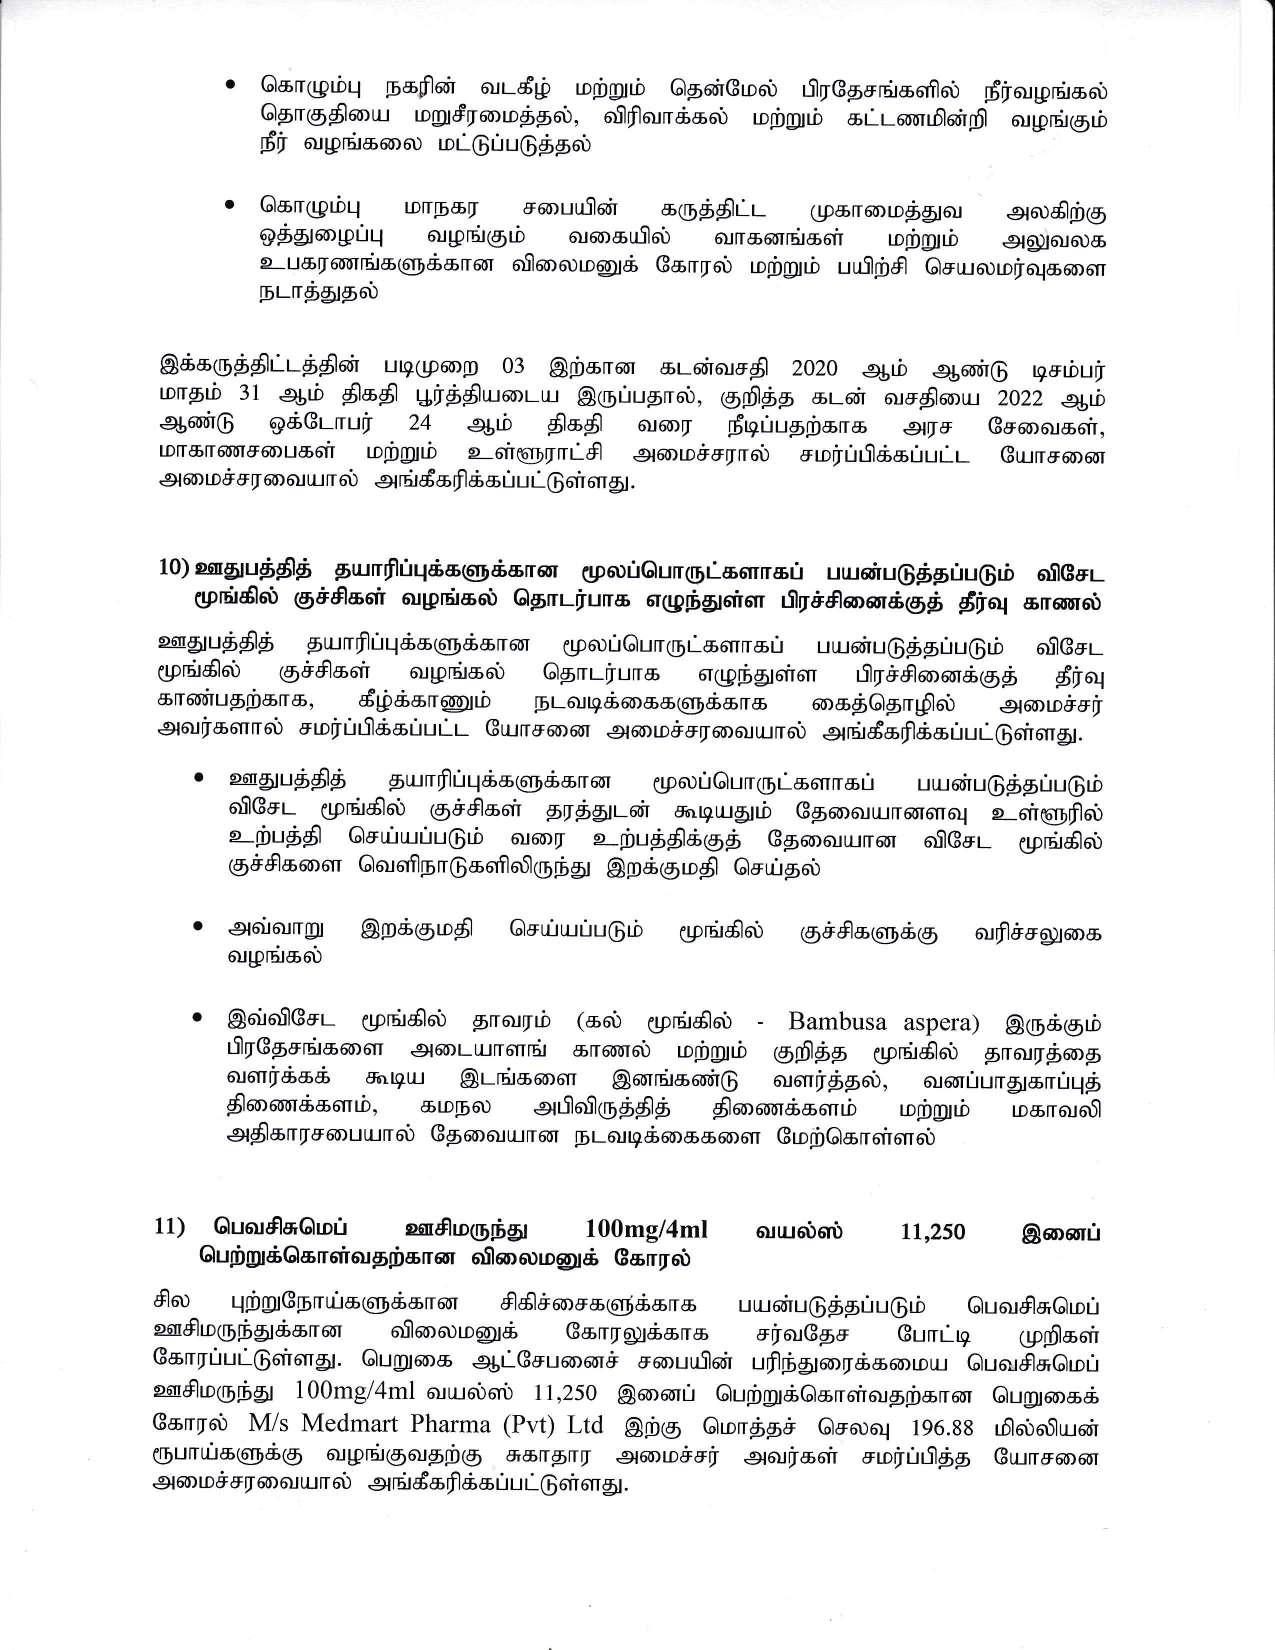 Cabinet Decision on 12.10.2020 Tamil compressed page 005